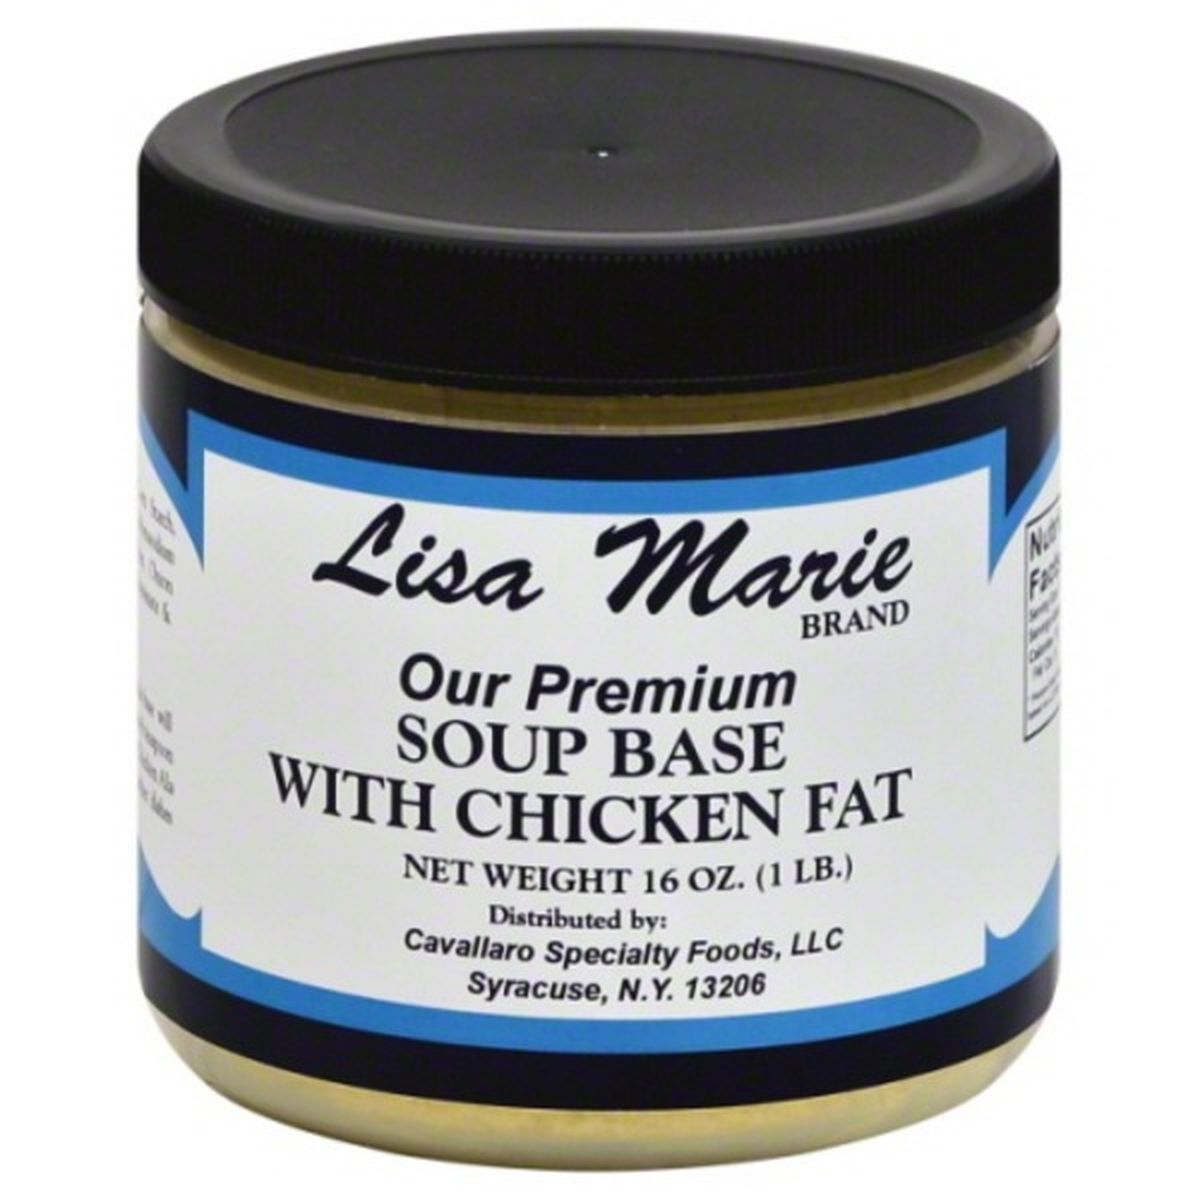 Calories in Lisa Marie Soup Base, with Chicken Fat